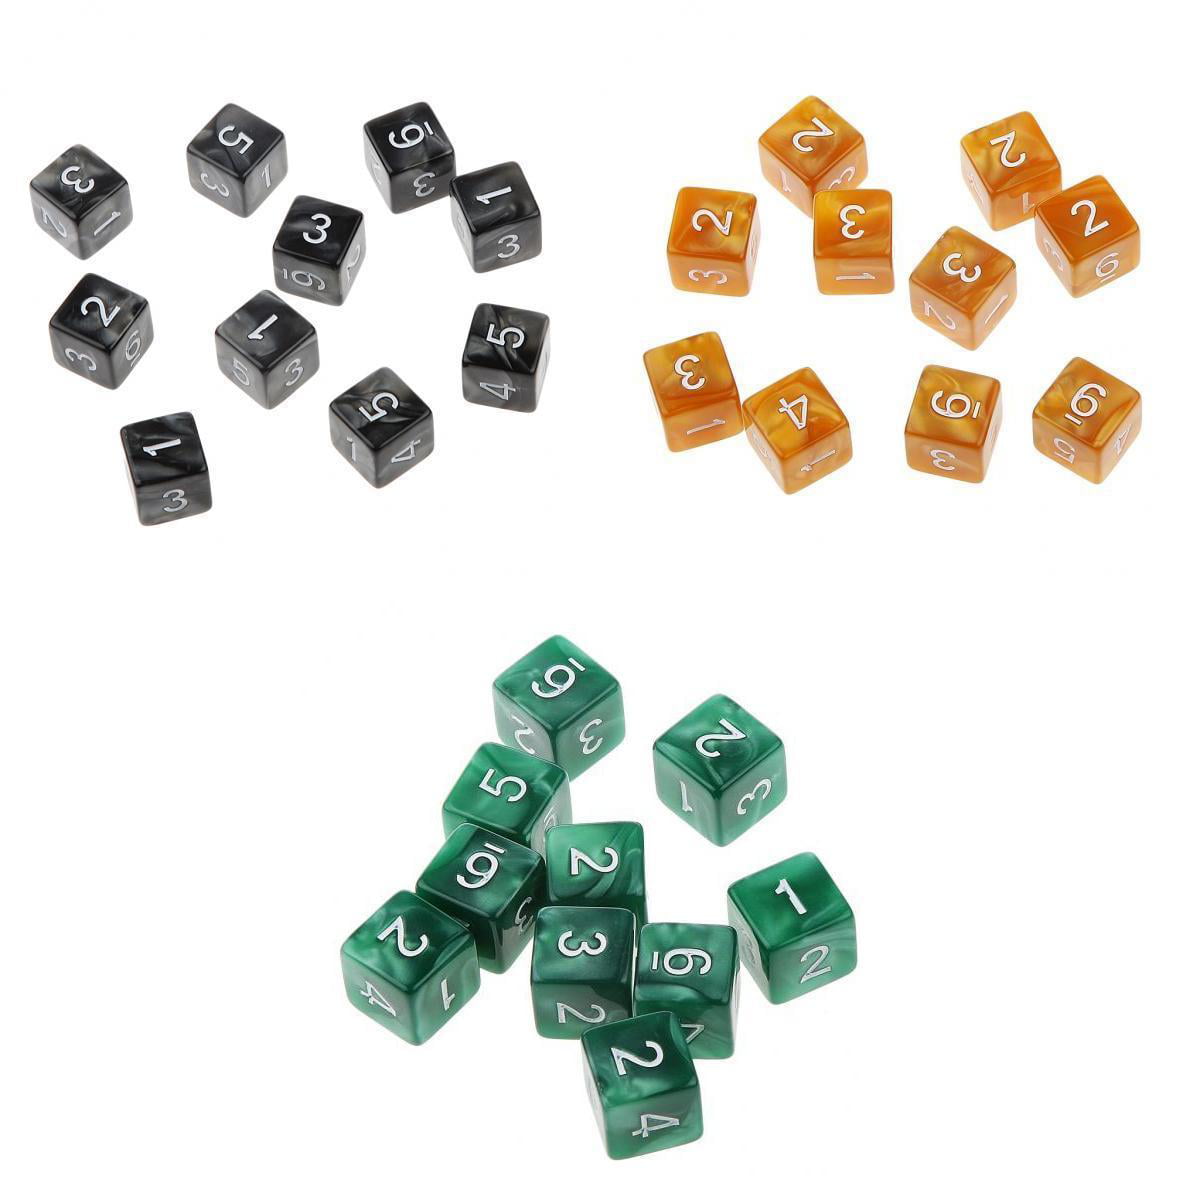 40 x Poker Dices Multi Sided Six Sided Dice Dice Game Accessories 